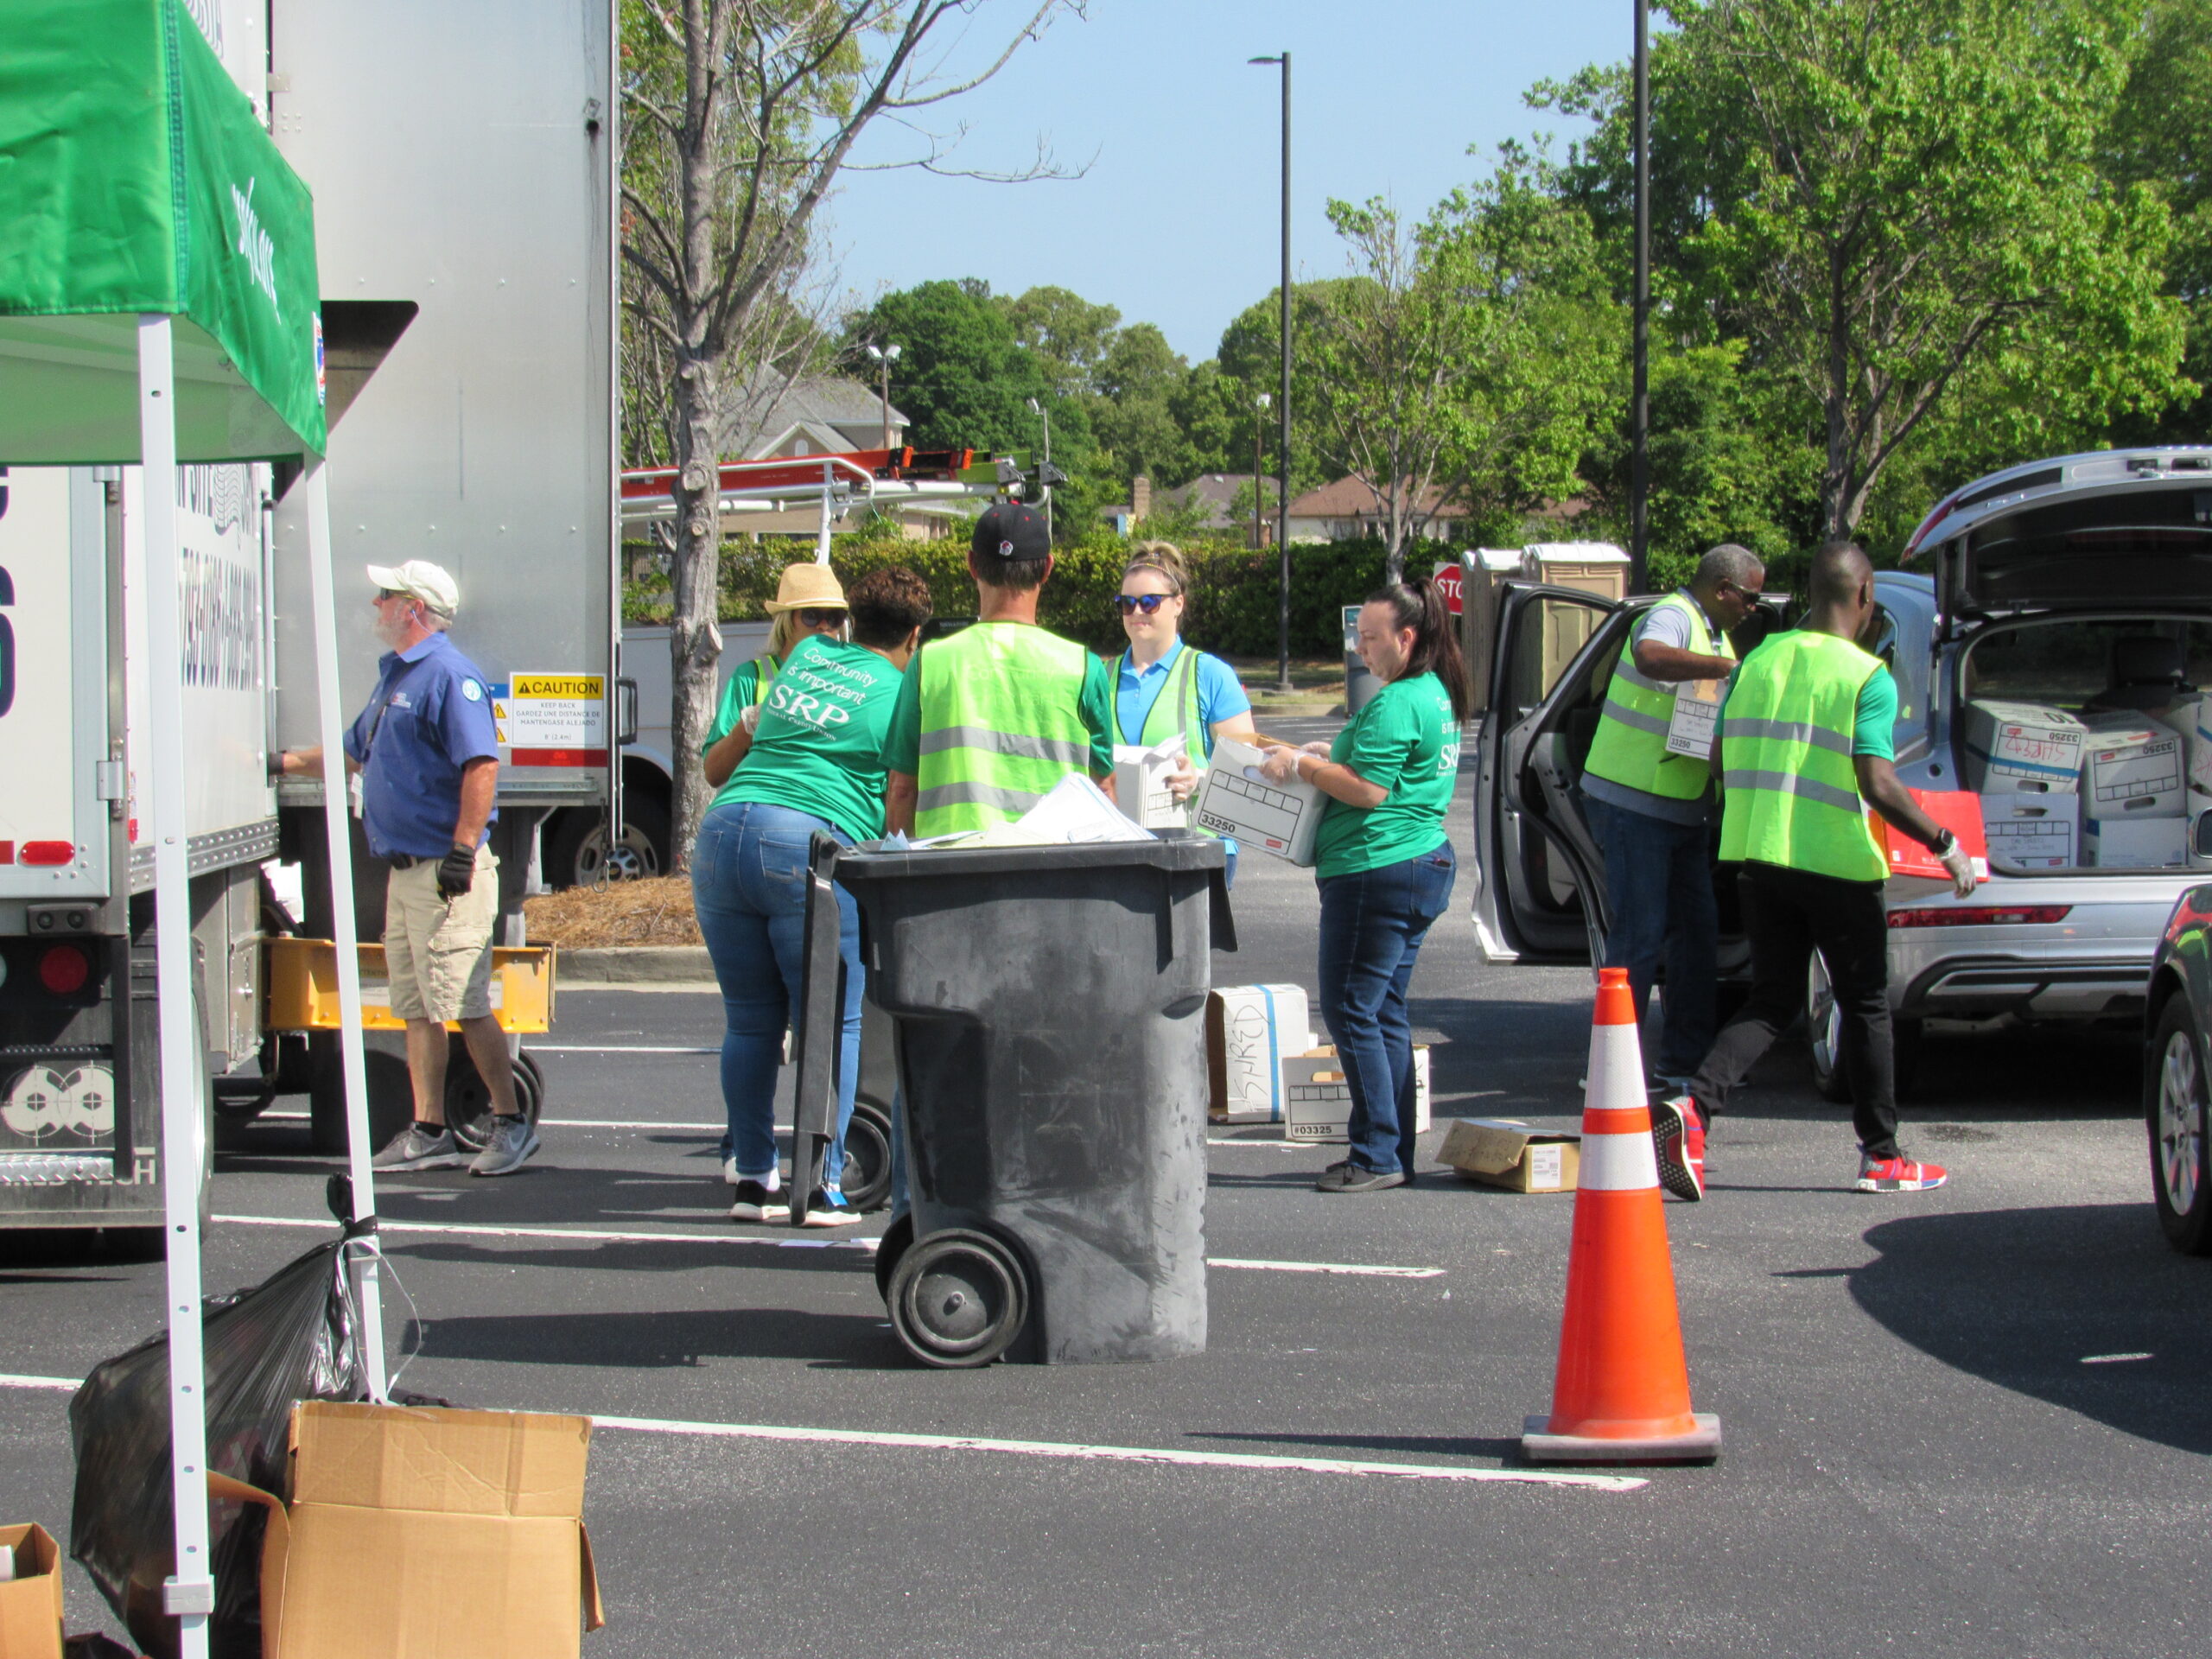 SRP FCU MOVIE NIGHT AND SHRED EVENT GREAT SUCCESS